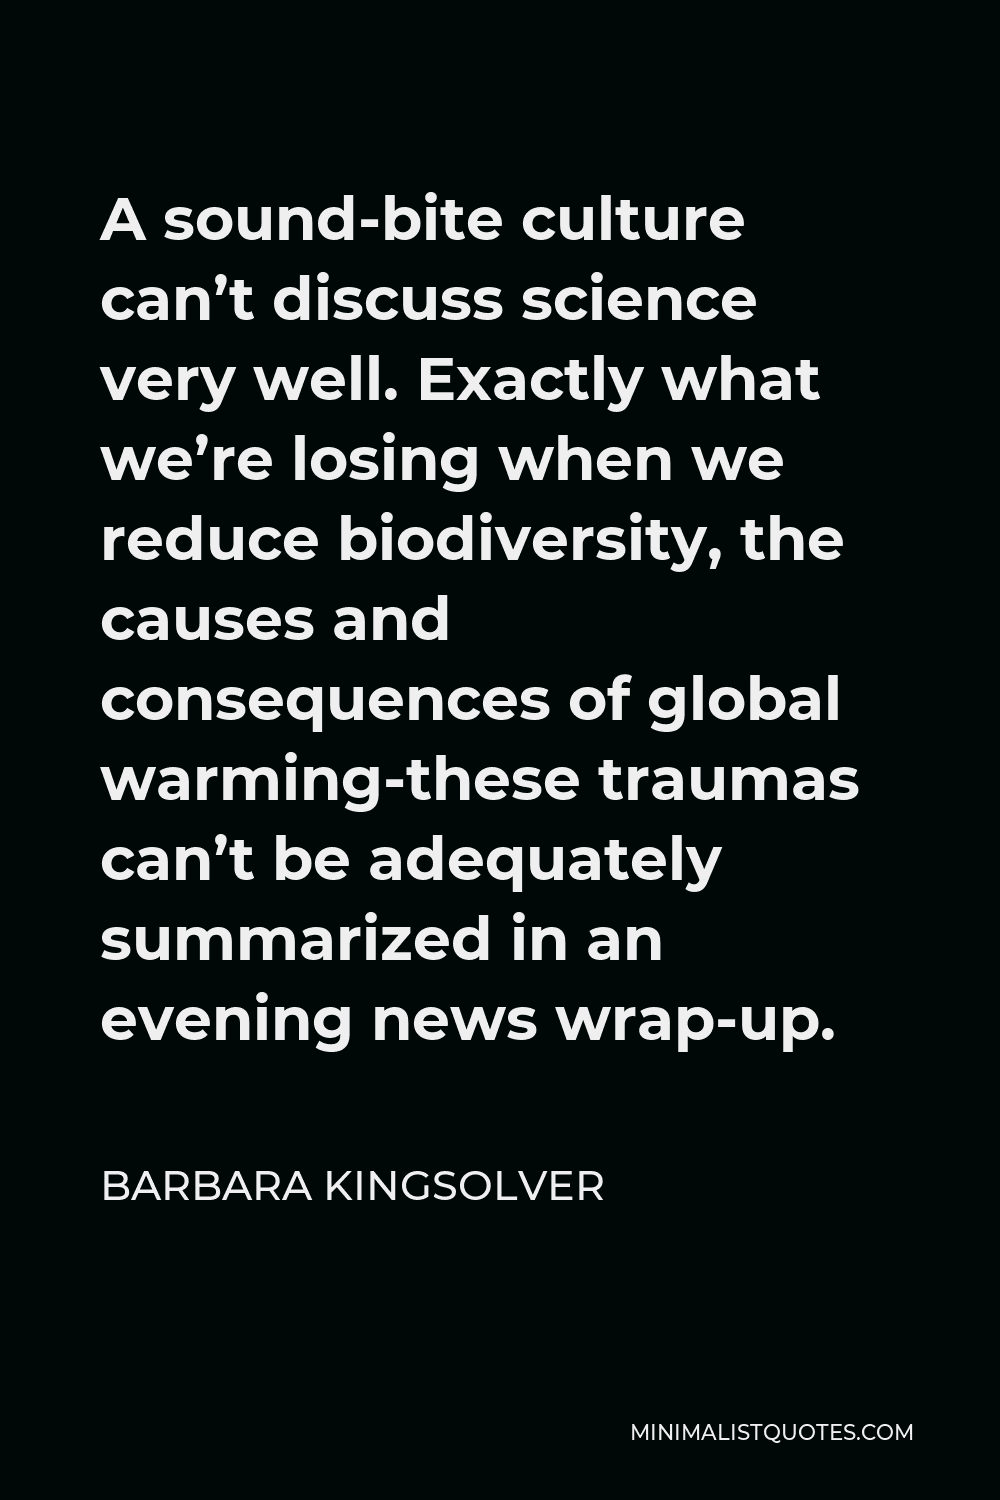 Barbara Kingsolver Quote - A sound-bite culture can’t discuss science very well. Exactly what we’re losing when we reduce biodiversity, the causes and consequences of global warming-these traumas can’t be adequately summarized in an evening news wrap-up.